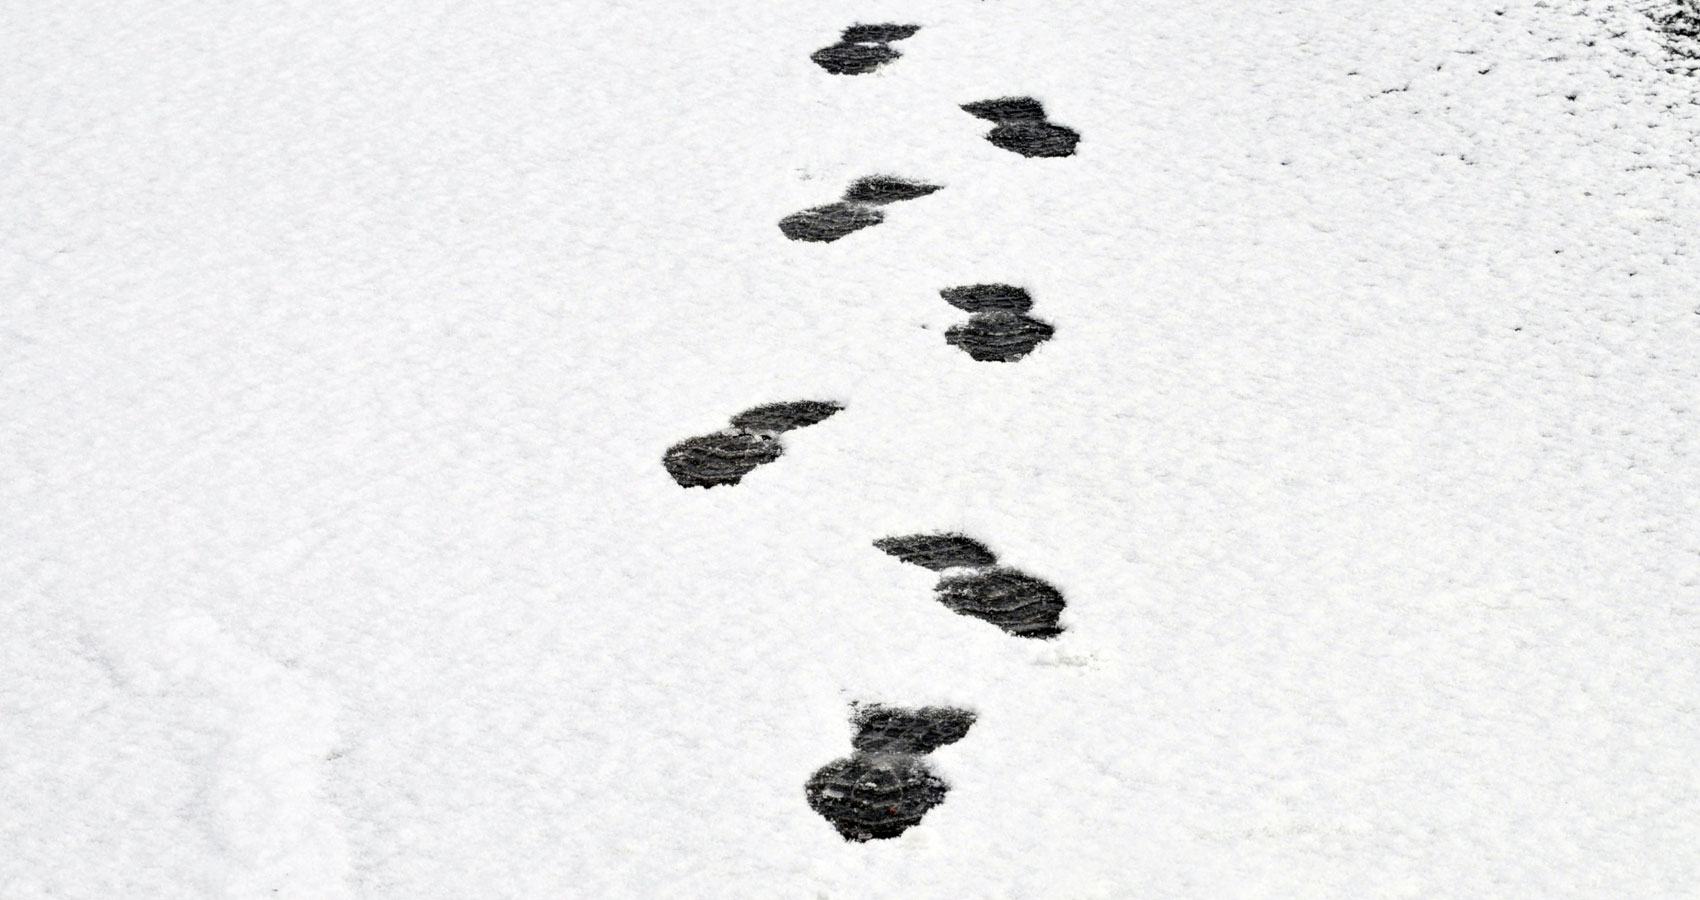 A Walk In The Snow written by Gina at Spillwords.com